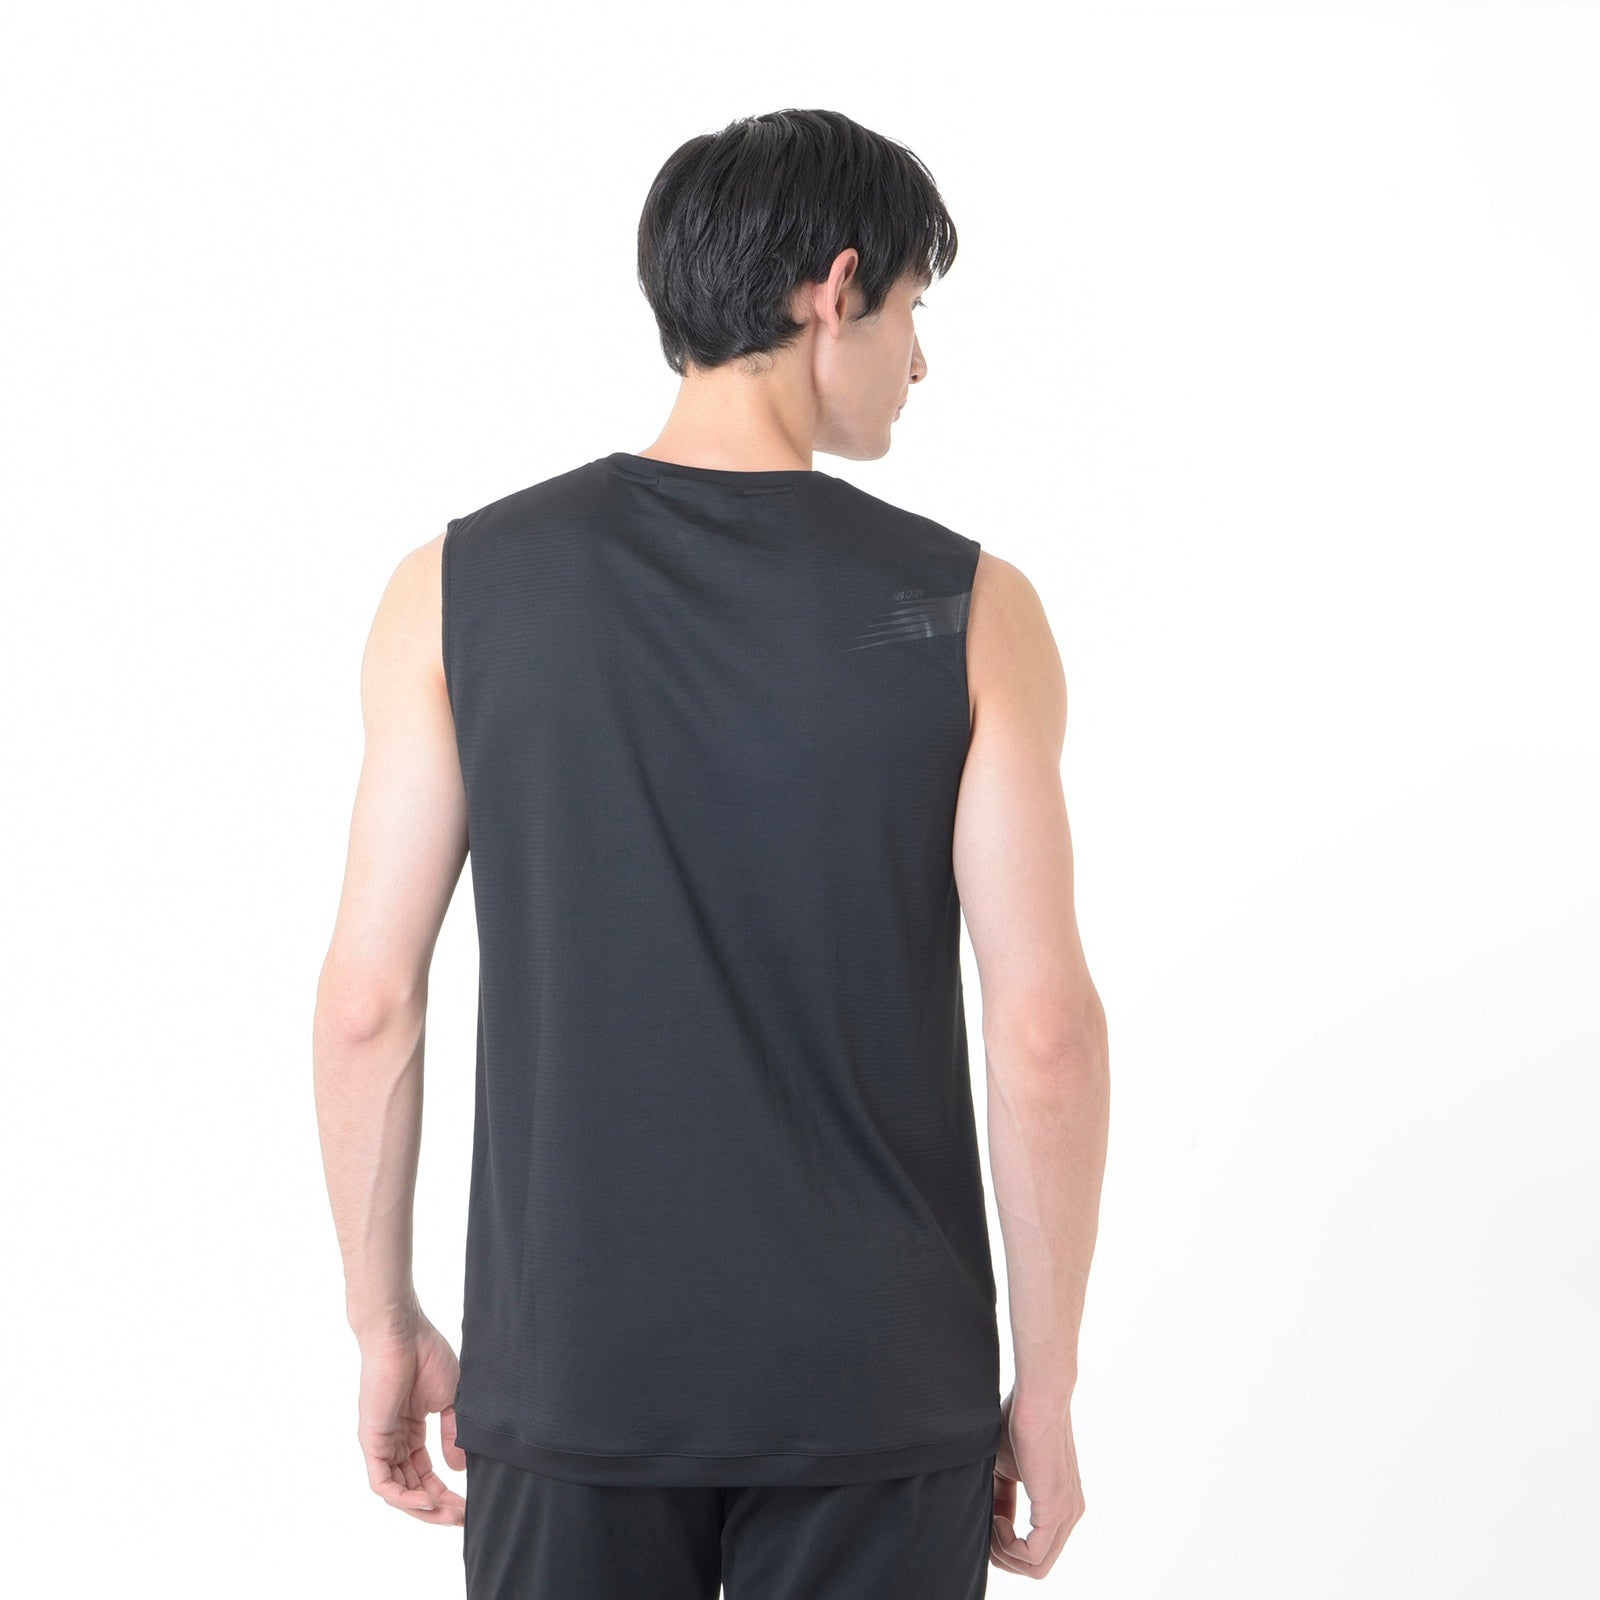 Black Out Collection Practice Shirt Sleeveless